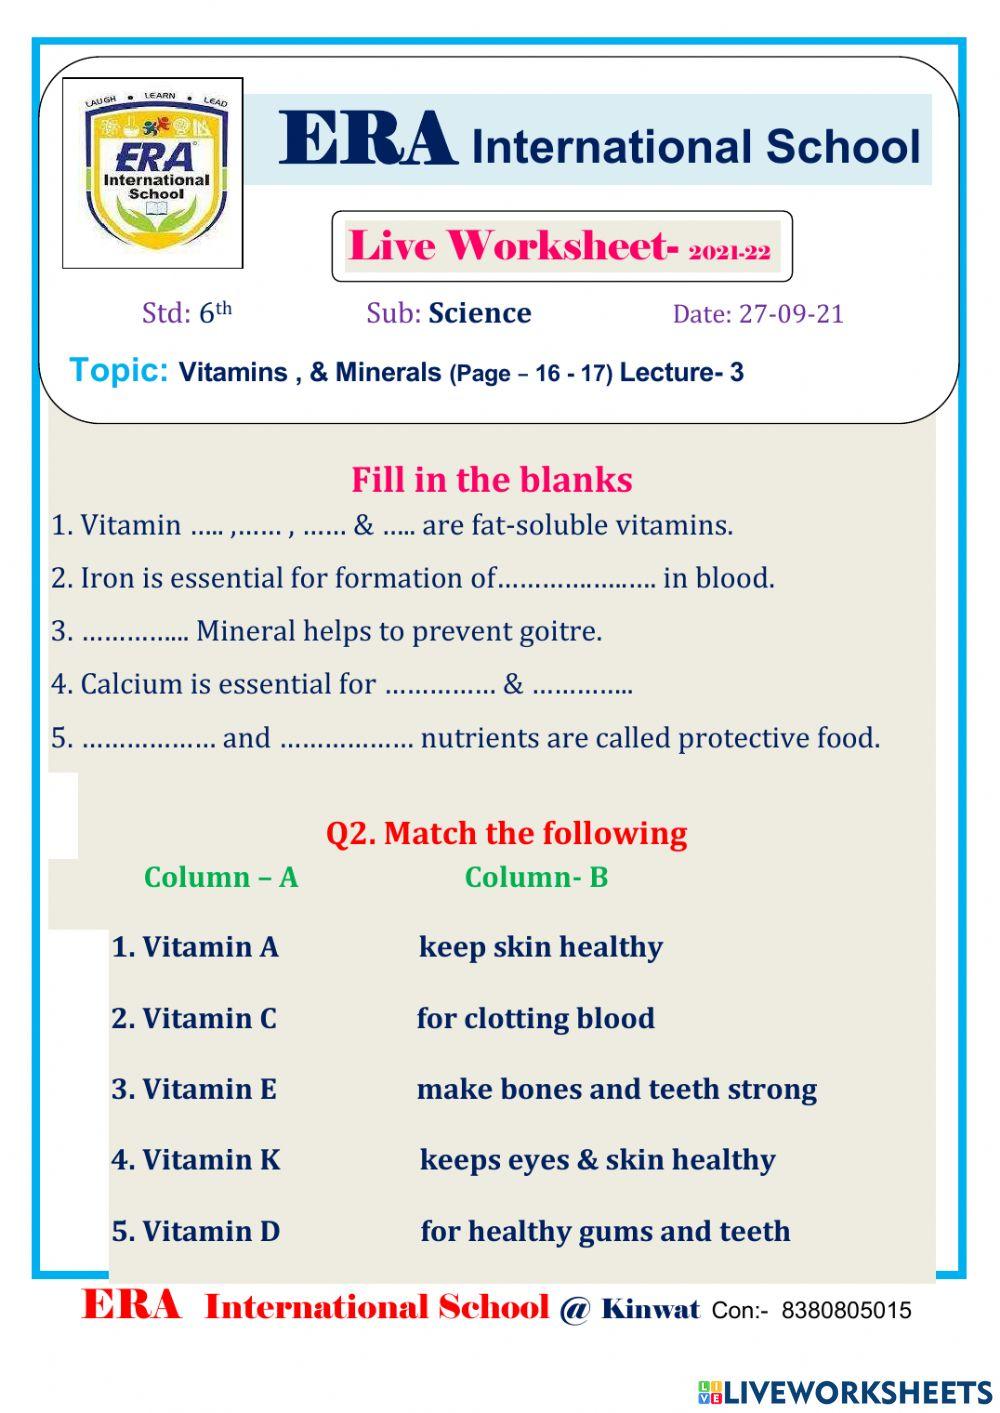 Vitamins , & Minerals (Page – 16 - 17) Lecture- 3